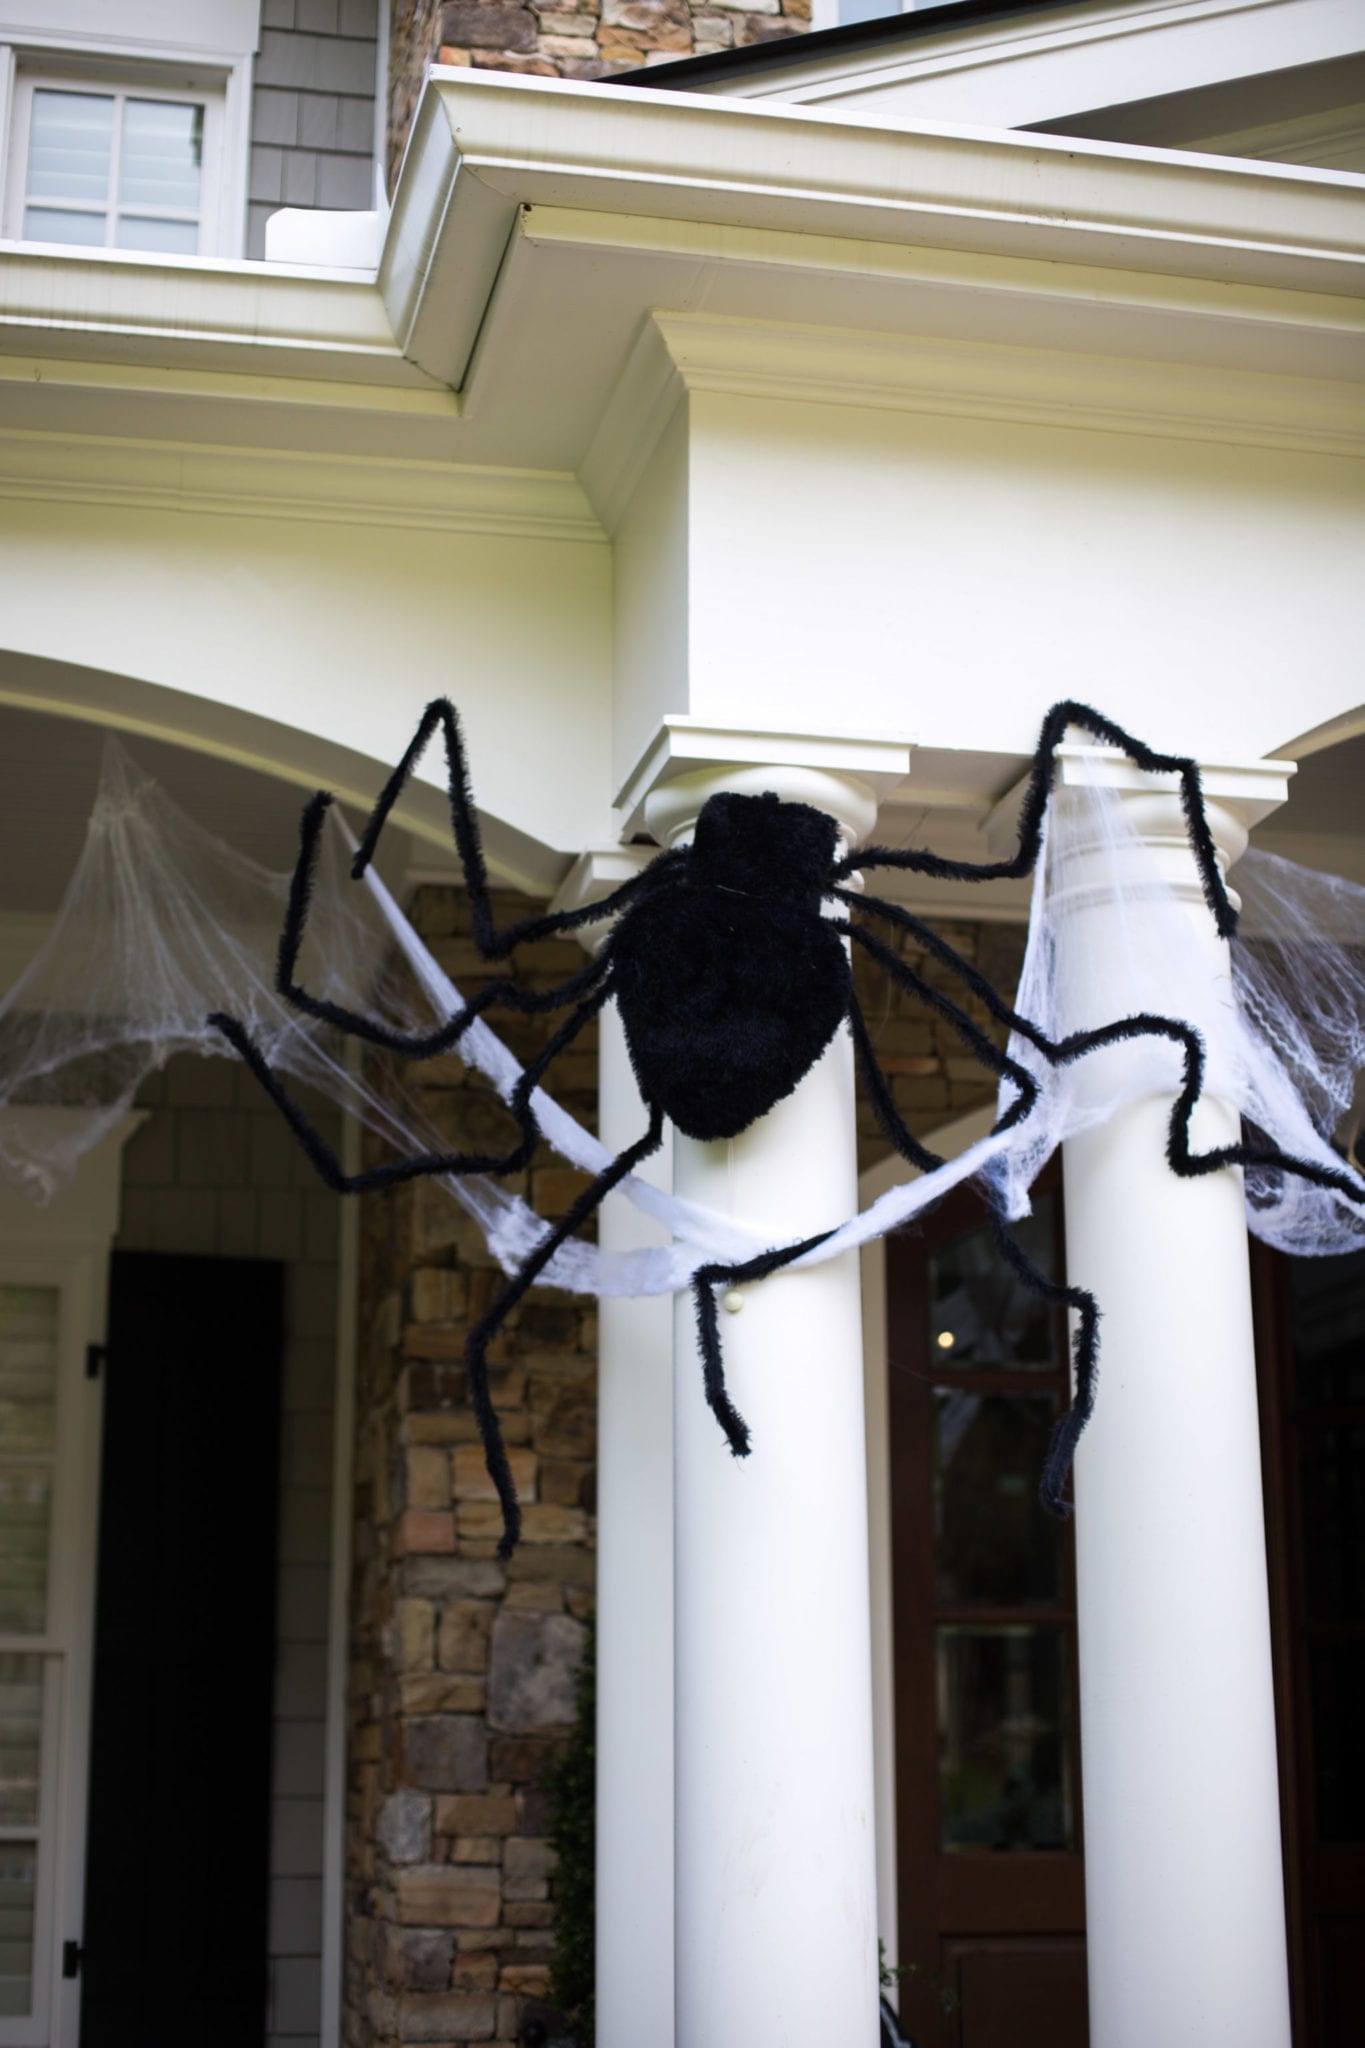 Outdoor spider for decorating your house for Halloween.